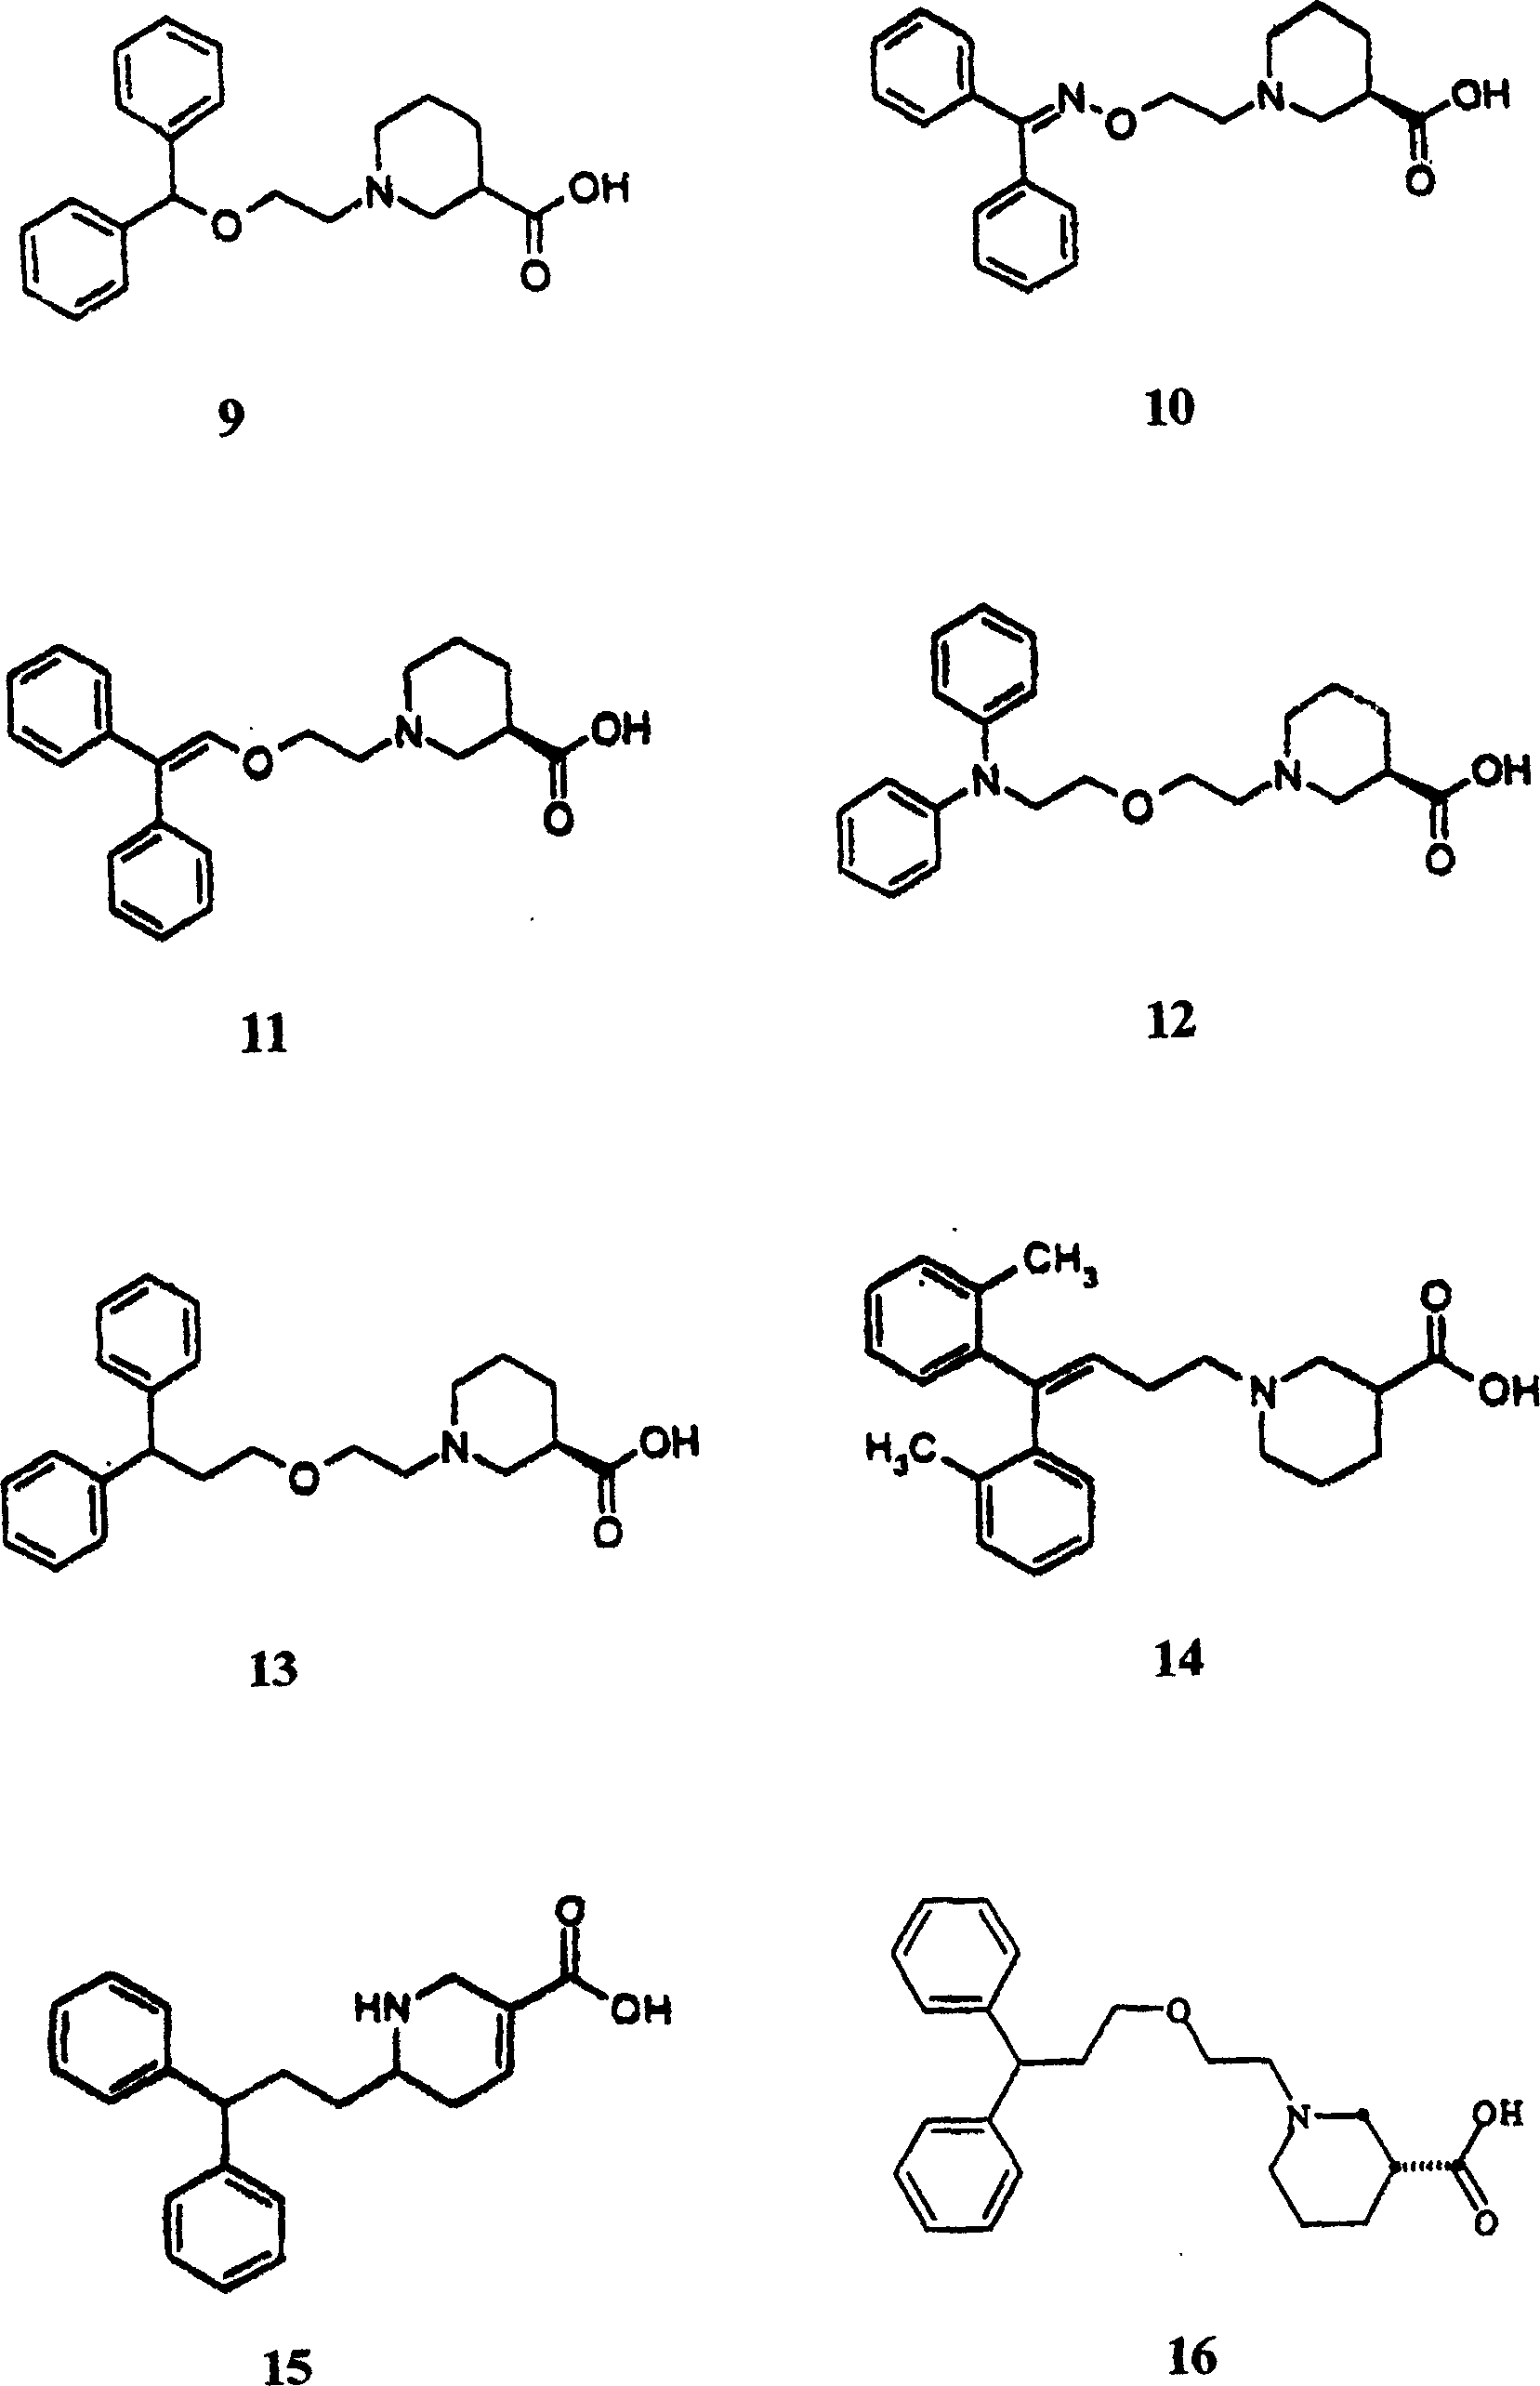 Use of GABA transport protein inhibitor in preparing medicine for treating alcohol habituation and abuse